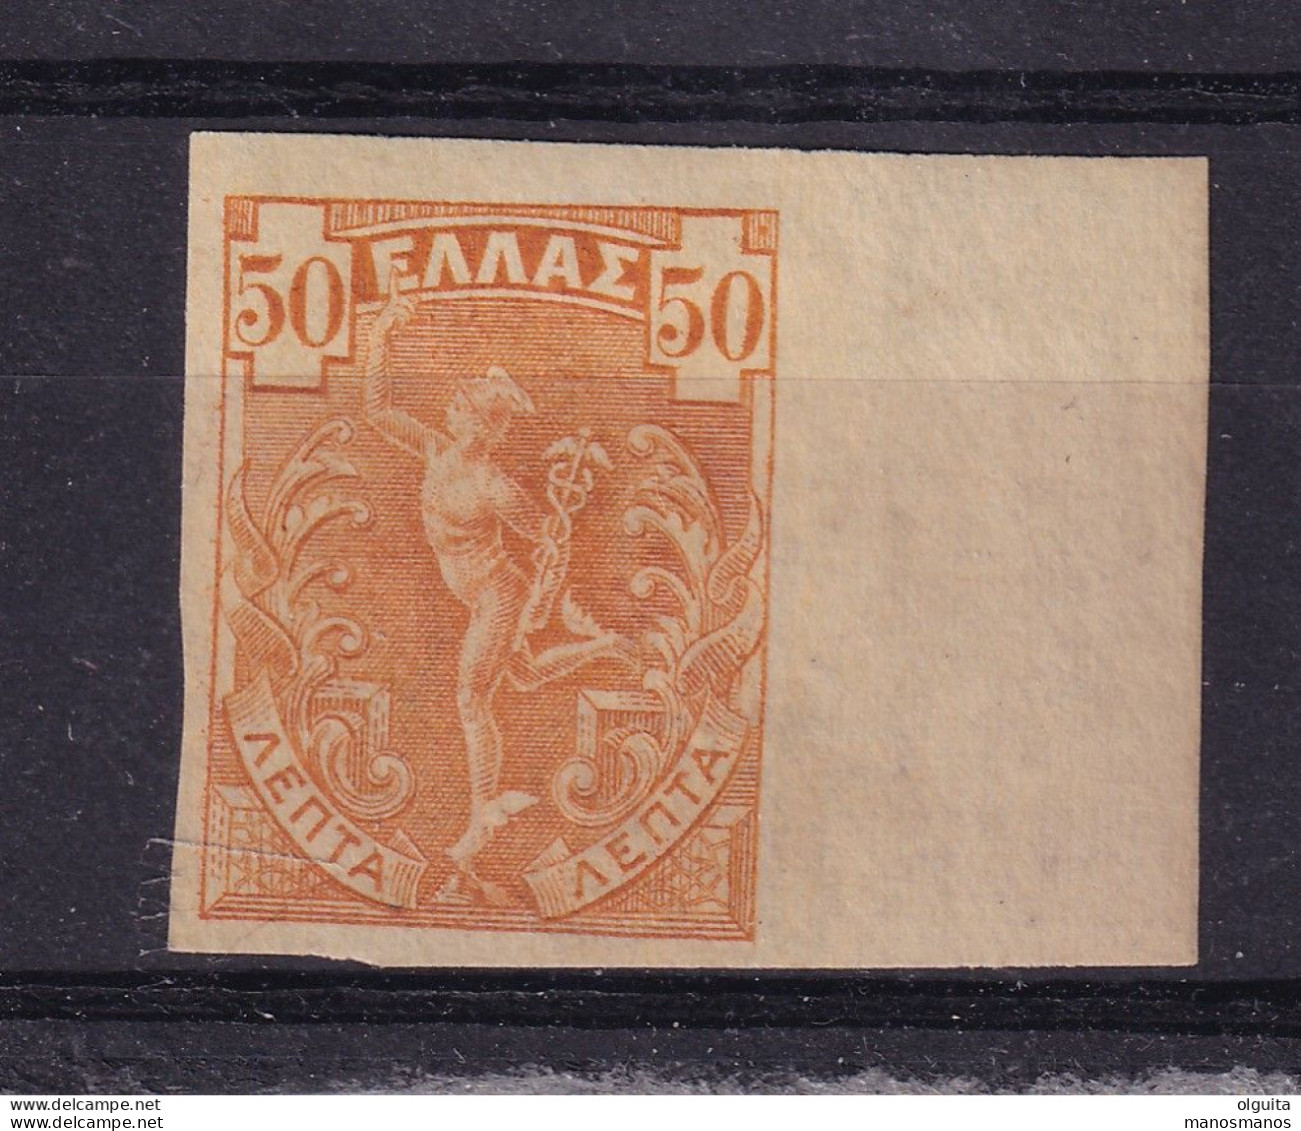 DCPGR 094 - GREECE Iptamenos - Imperforate Marginal Pair - 30 Lepta In Definitive Colour - Mint Lightly Hinged - Beneficenza